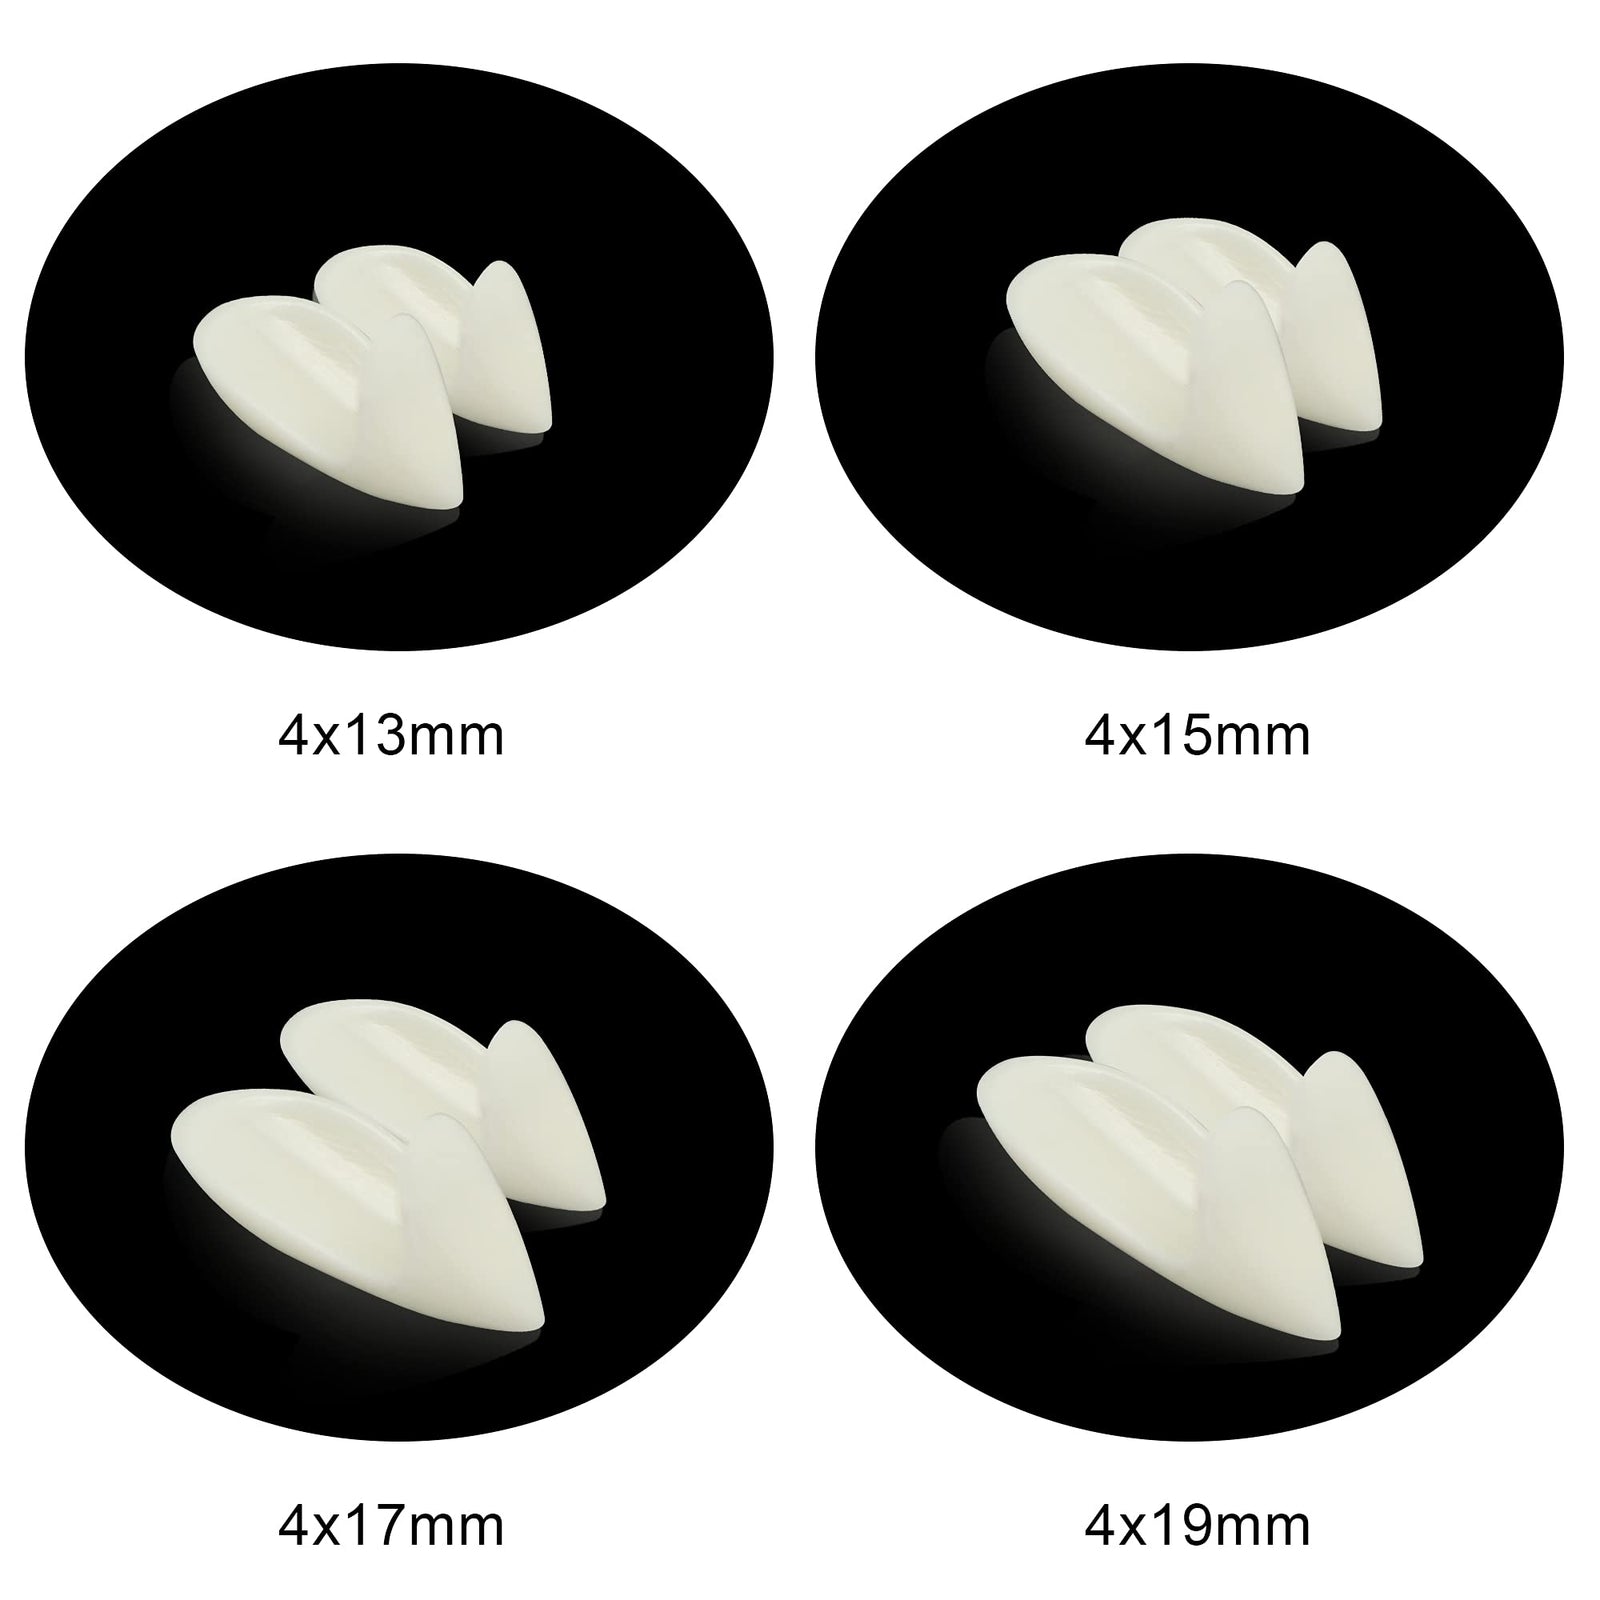 16 Pairs Vampire Fangs fake Teeth 4 sizes for Halloween Cosplay kids and adults Prop Decoration Vampire Tooth White Horror 13mm, 15mm, 17mm, 19mm False Teeth - 4 Sizes Dress Up Accessories